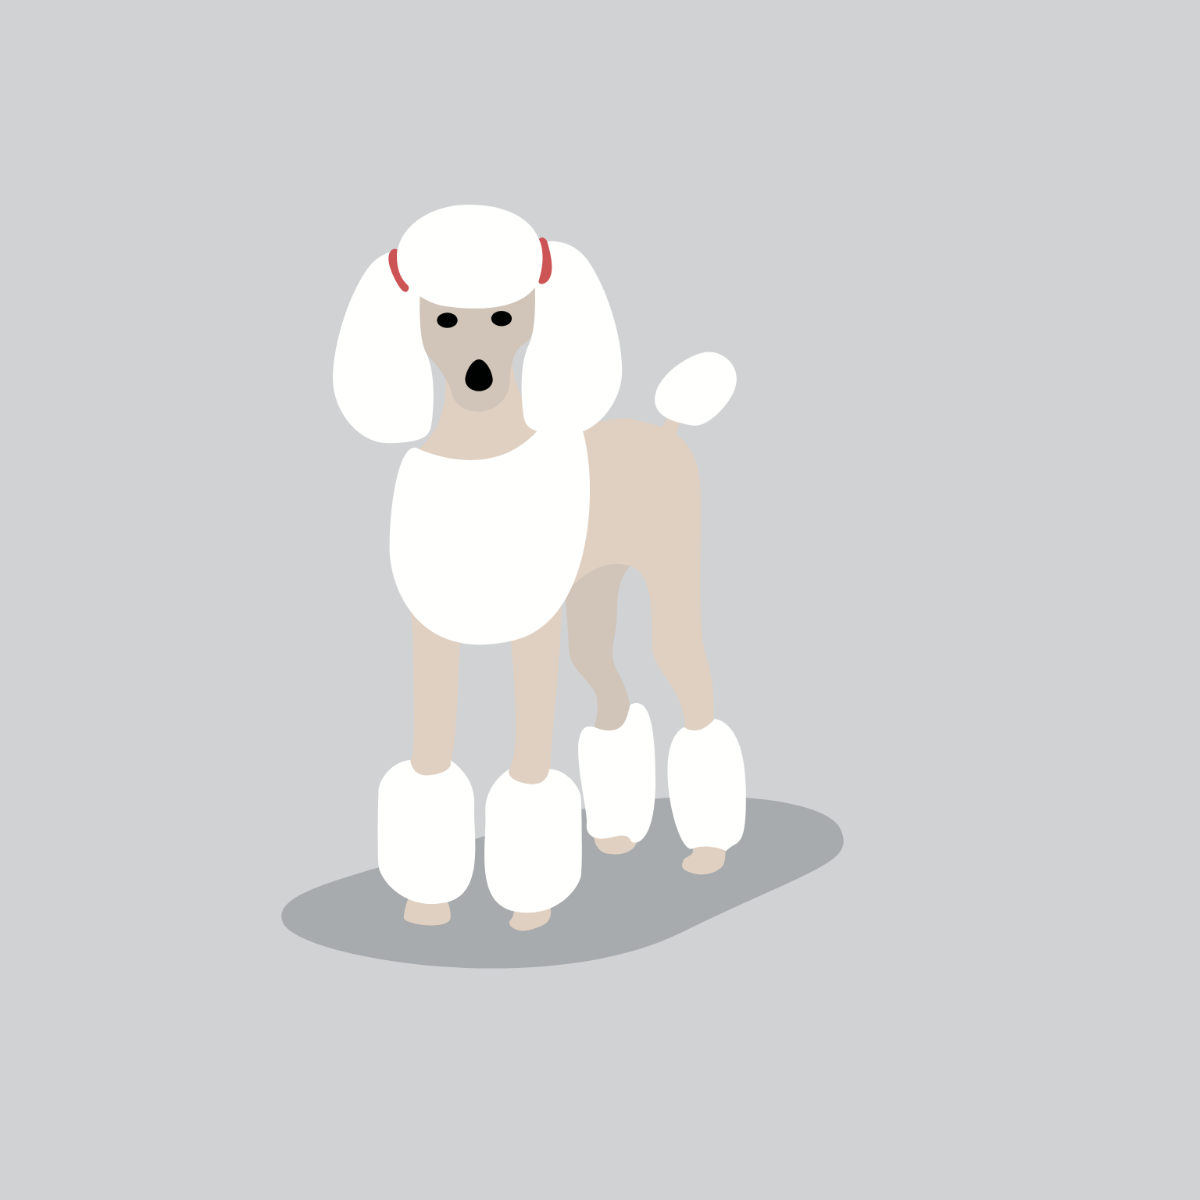 Poodle Dog Vector Template